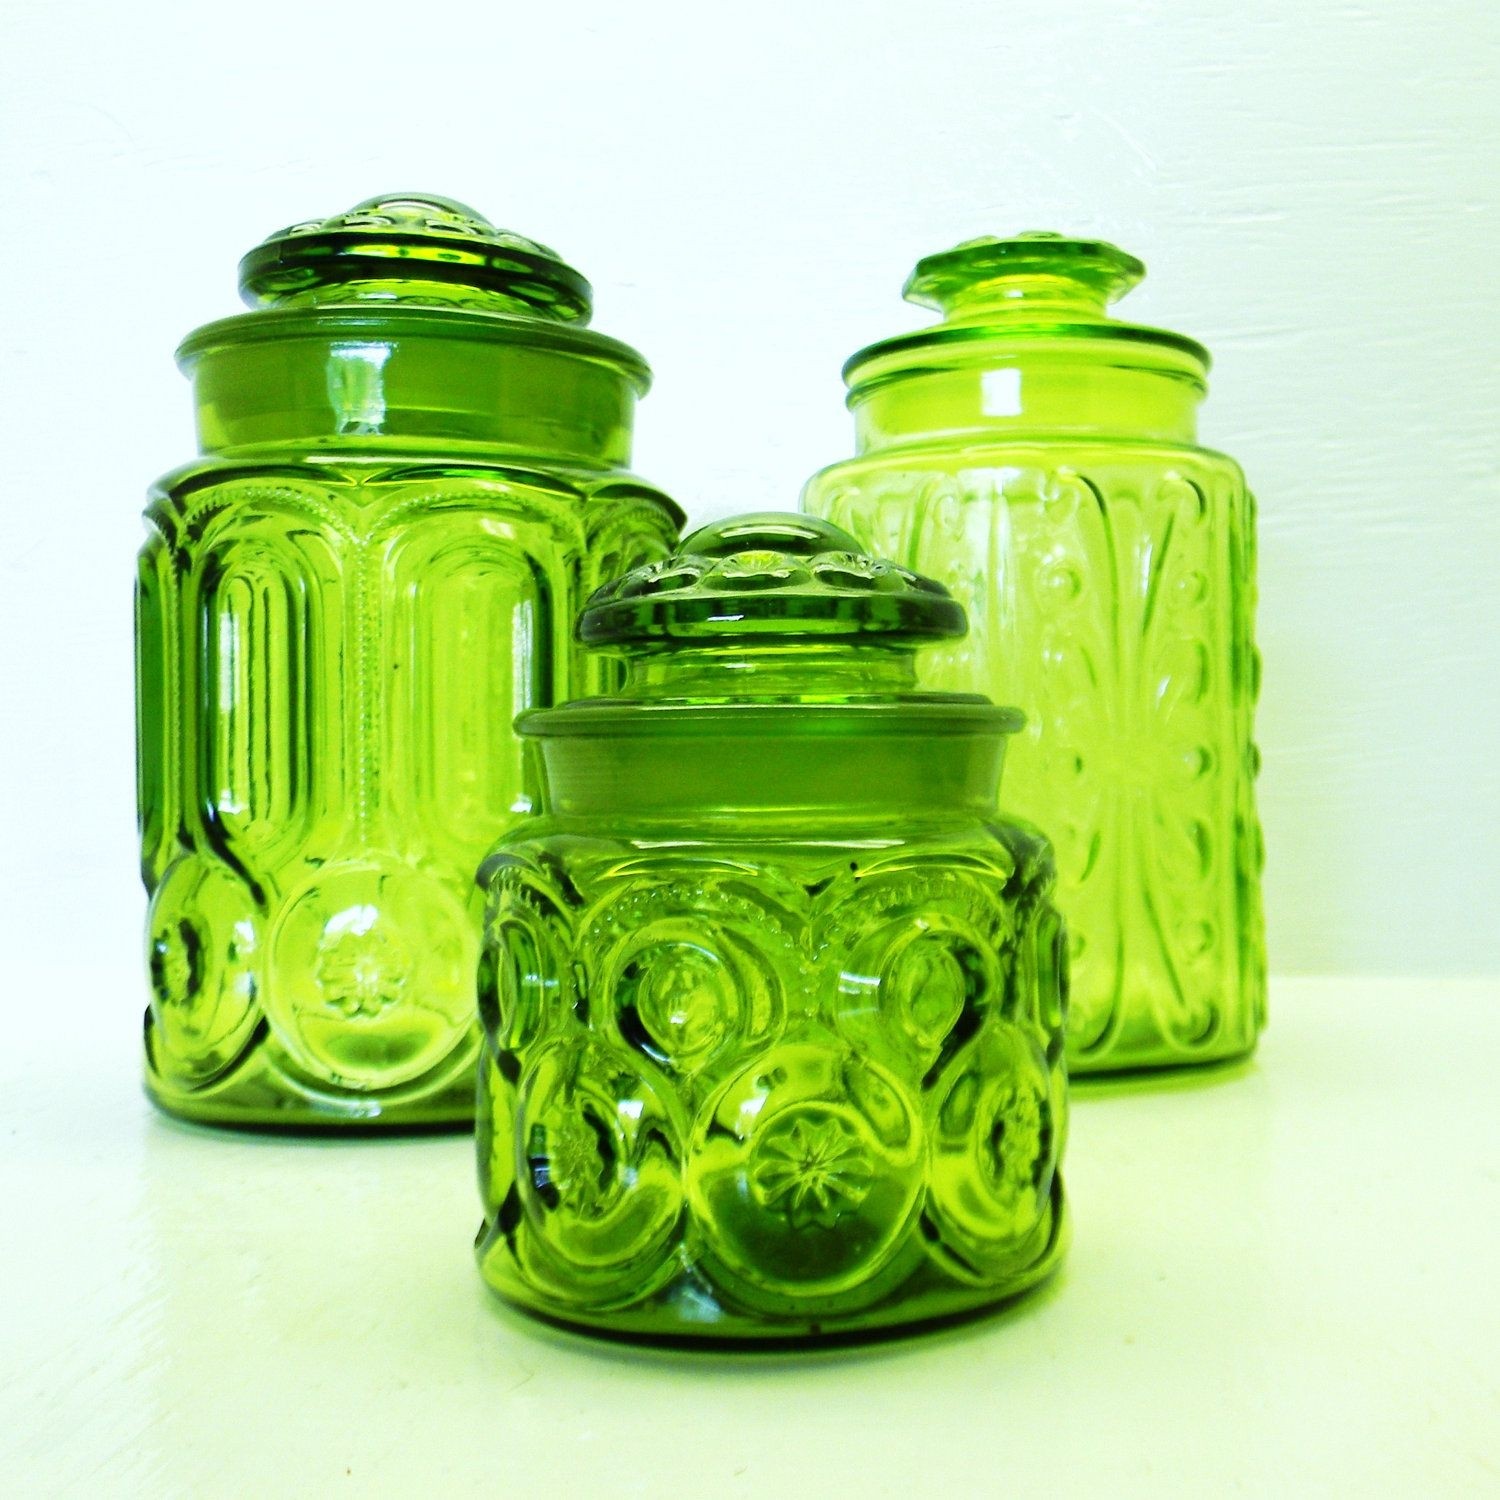 Colored glass kitchen canisters 17